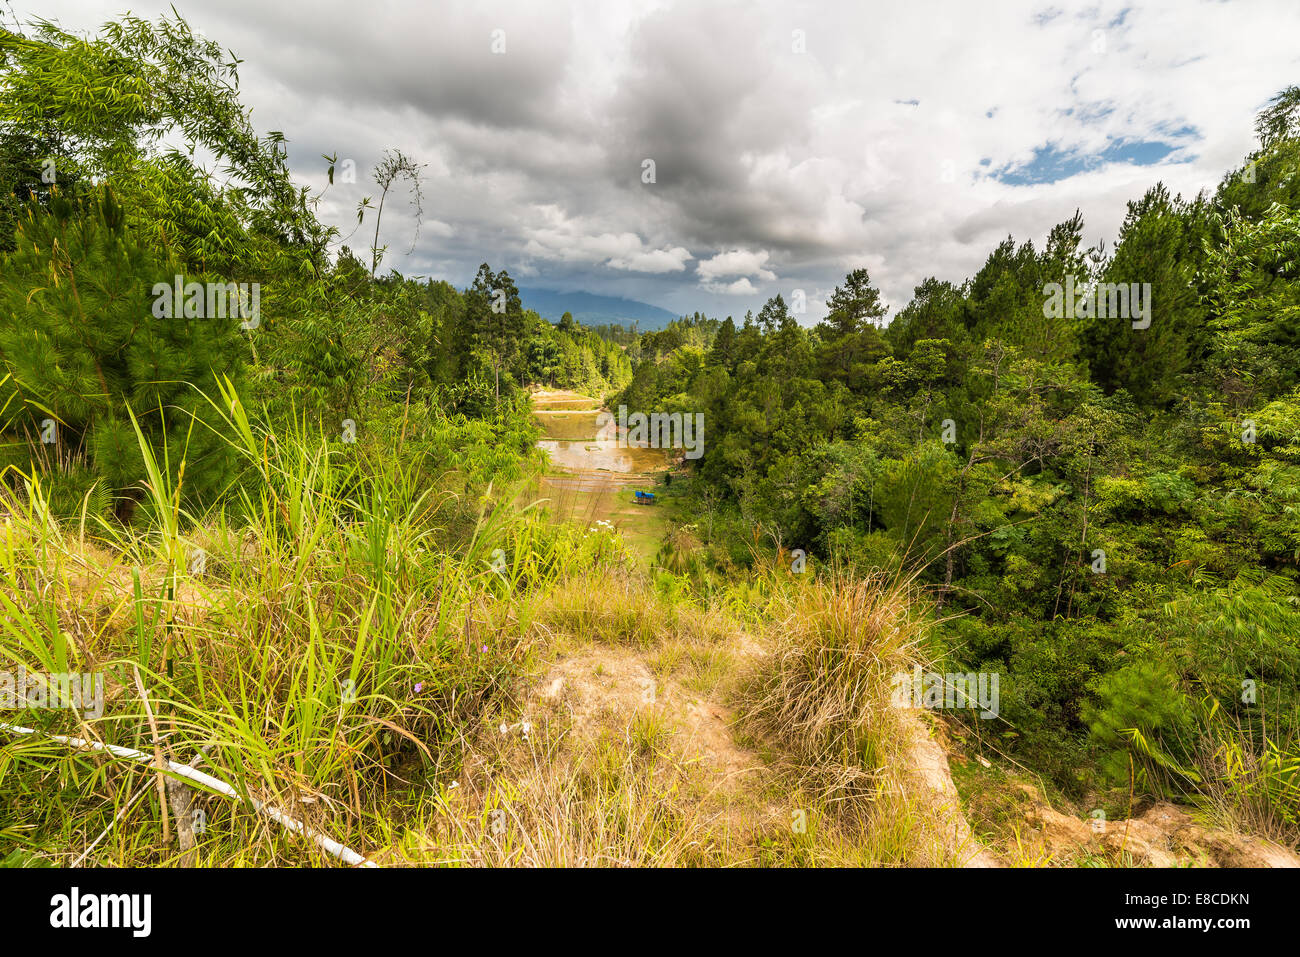 Stunning landscape and bright rice fields in Tana Toraja, South Sulawesi, Indonesia. Wide angle view. Stock Photo